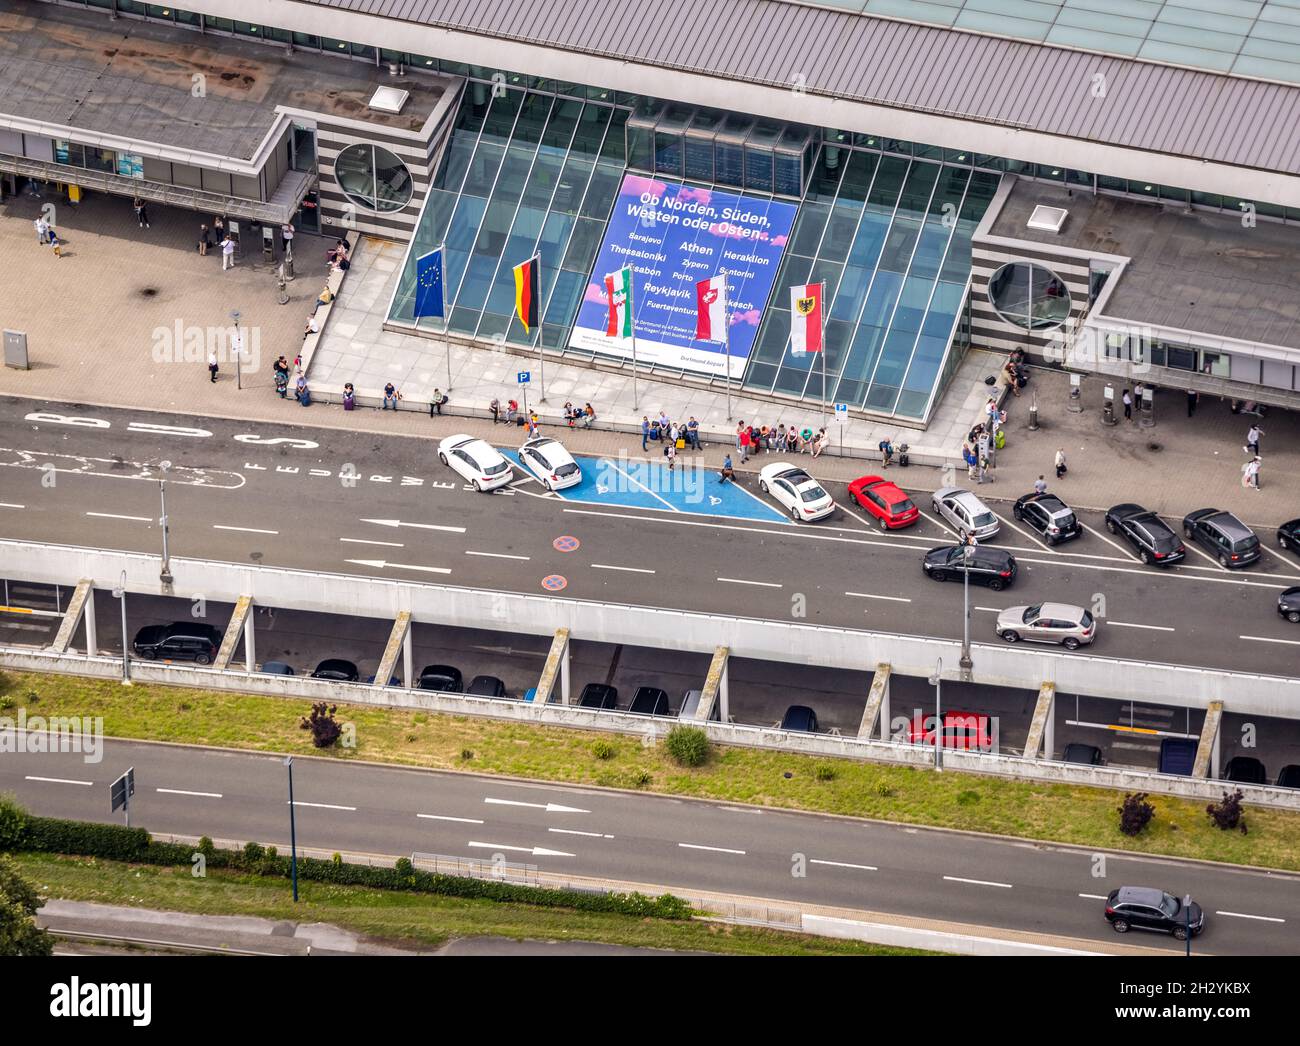 Aerial view, Dortmund airport, departure level, arrival right of way, flags at airport entrance, EDLW, Wickede, Dortmund, Ruhr area, North Rhine-Westp Stock Photo